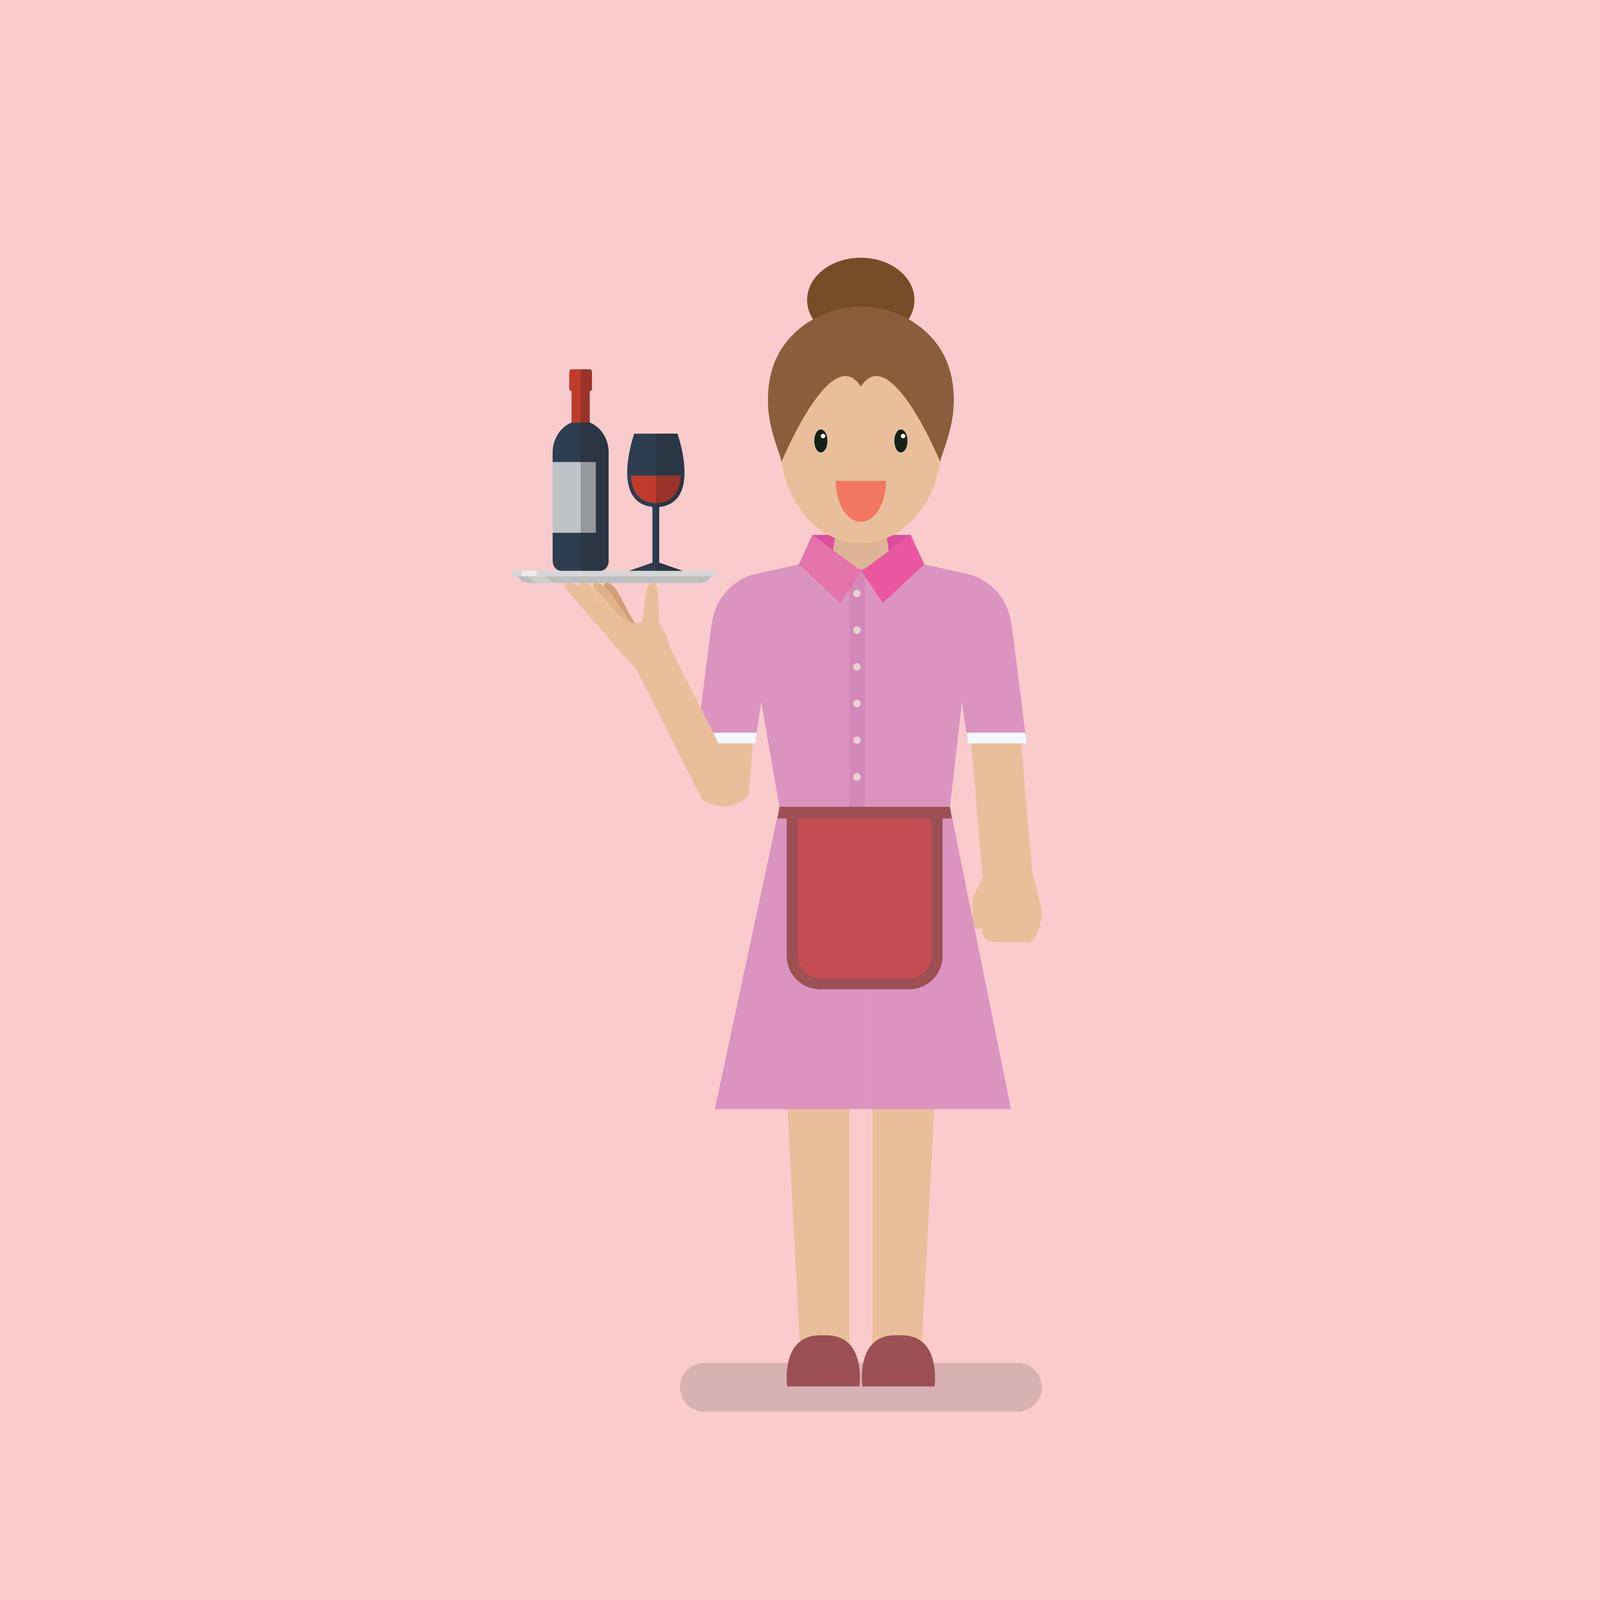 Waitress character cartoon. Pink collar worker in flat style